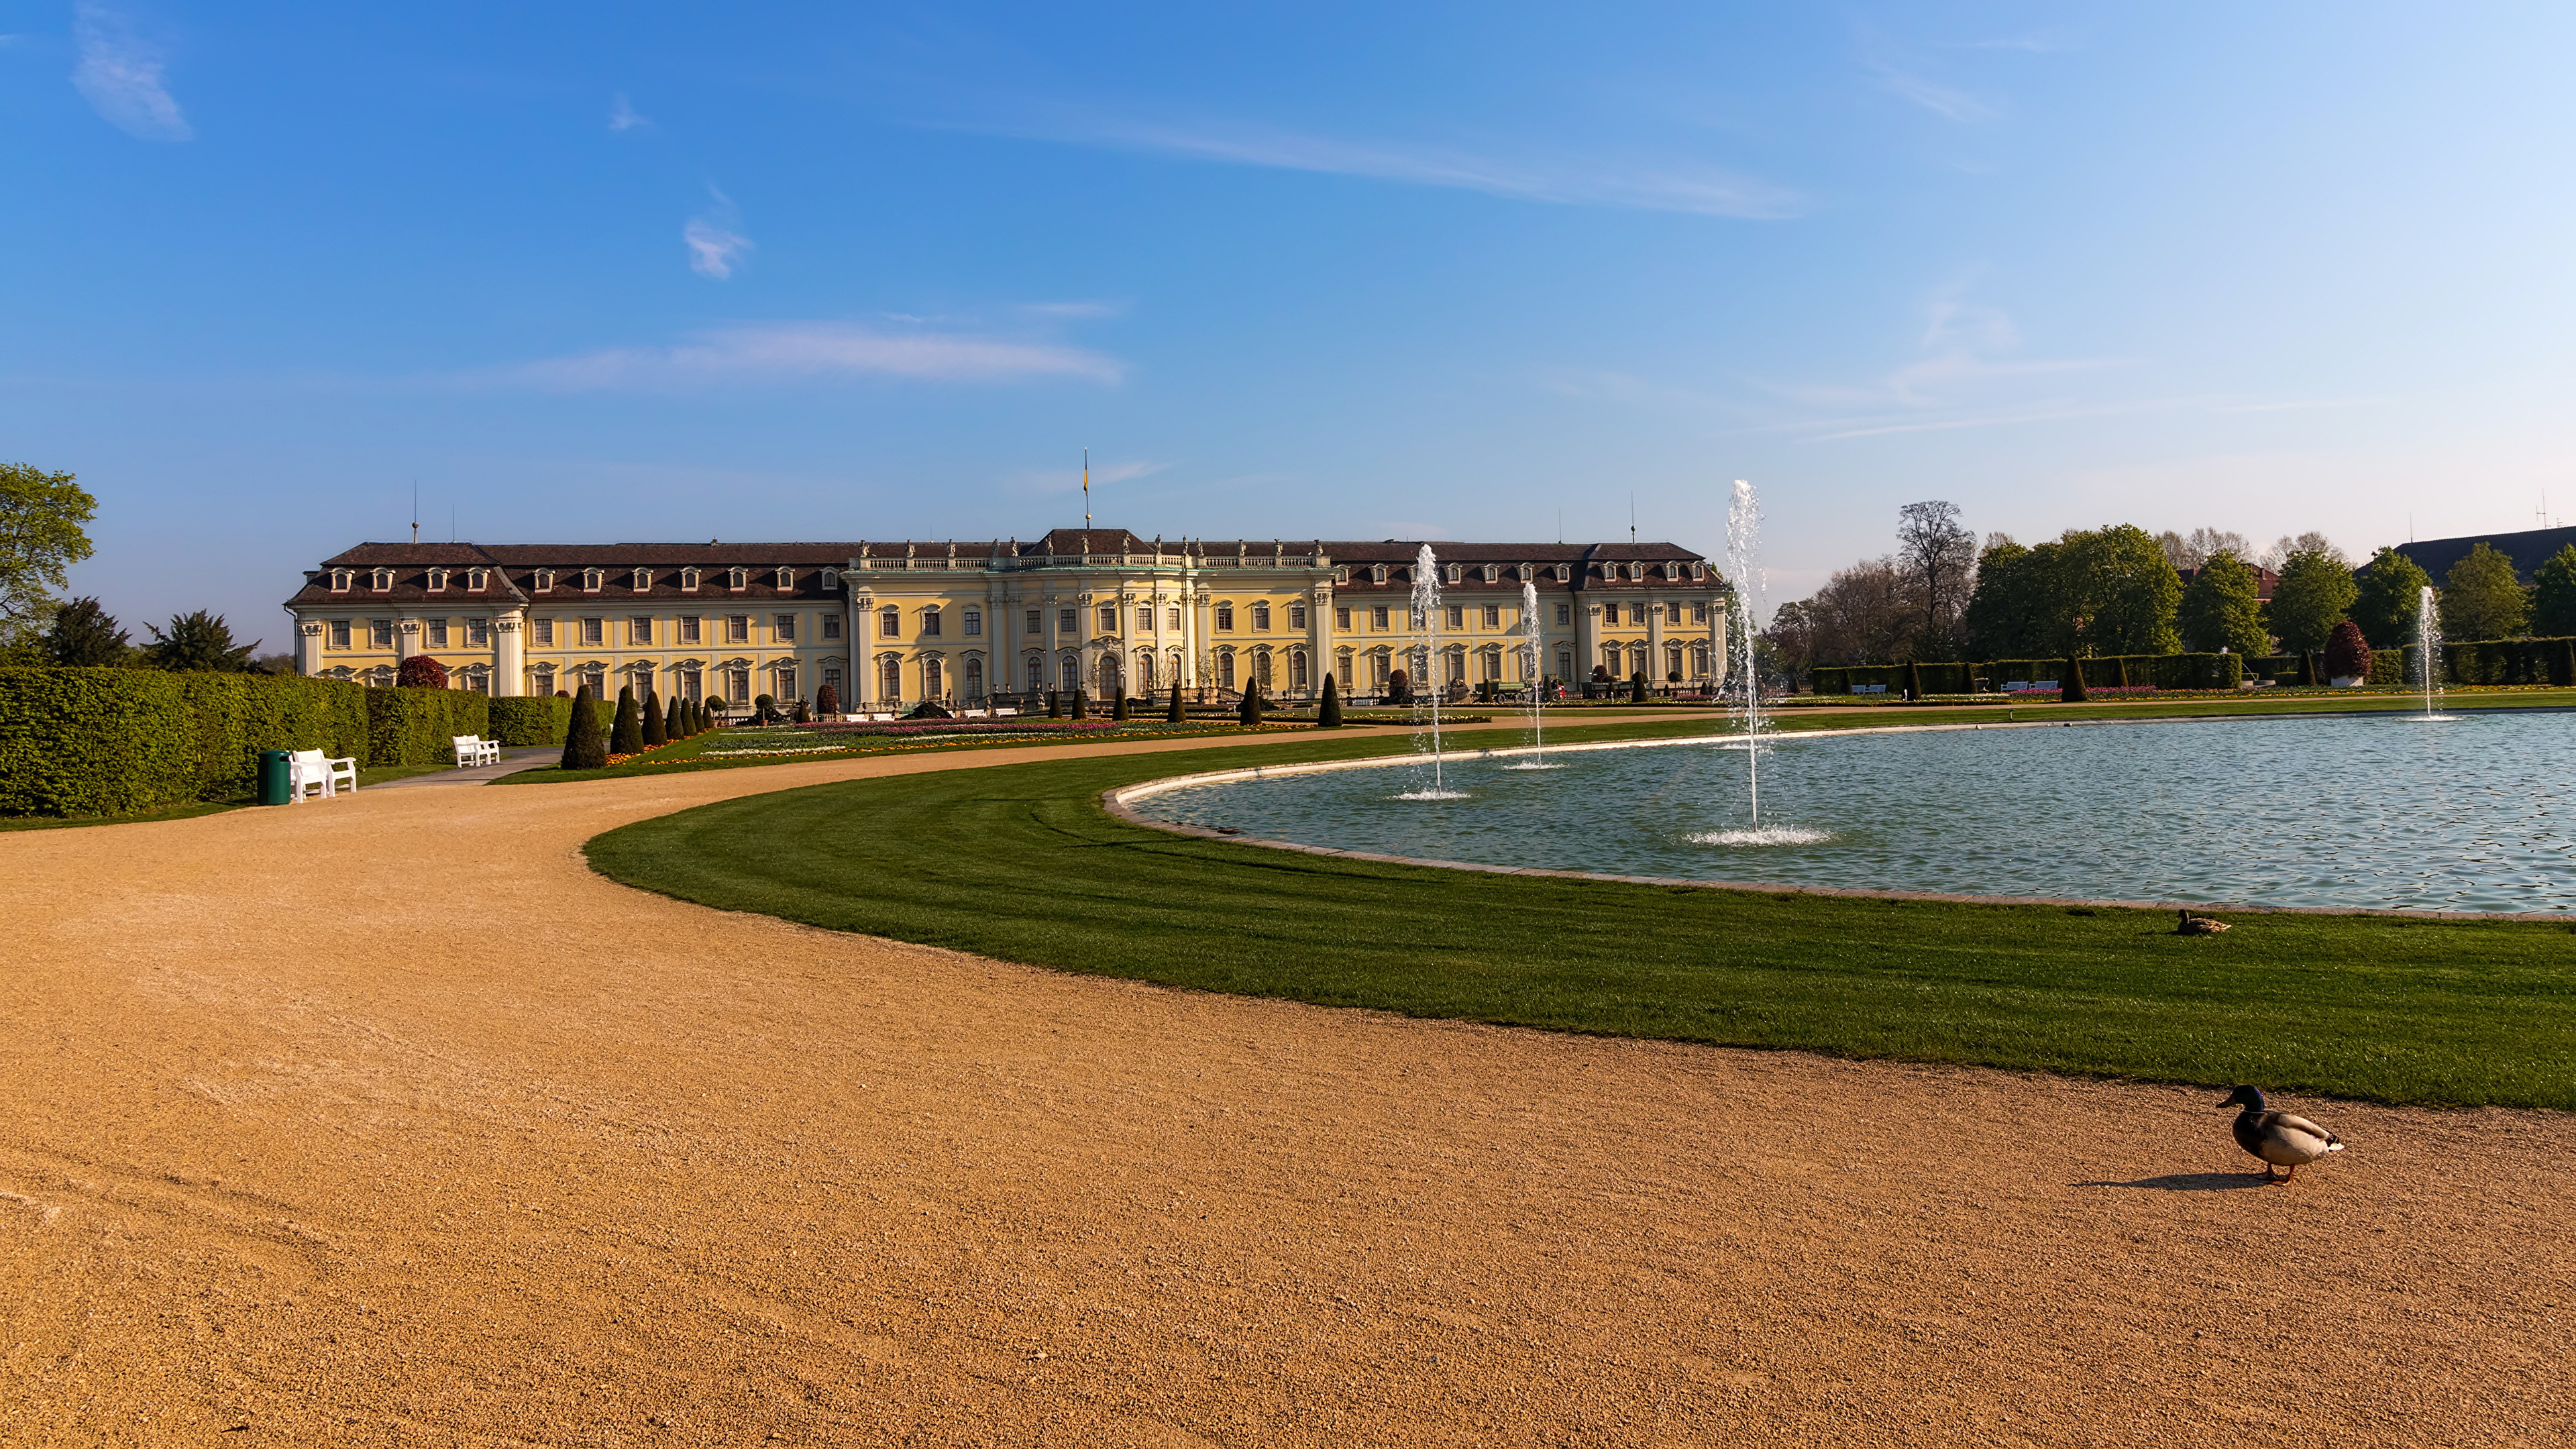 Palace: Ludwigsburg Palace, 452-room palace complex located in Ludwigsburg, Germany. 3840x2160 4K Background.